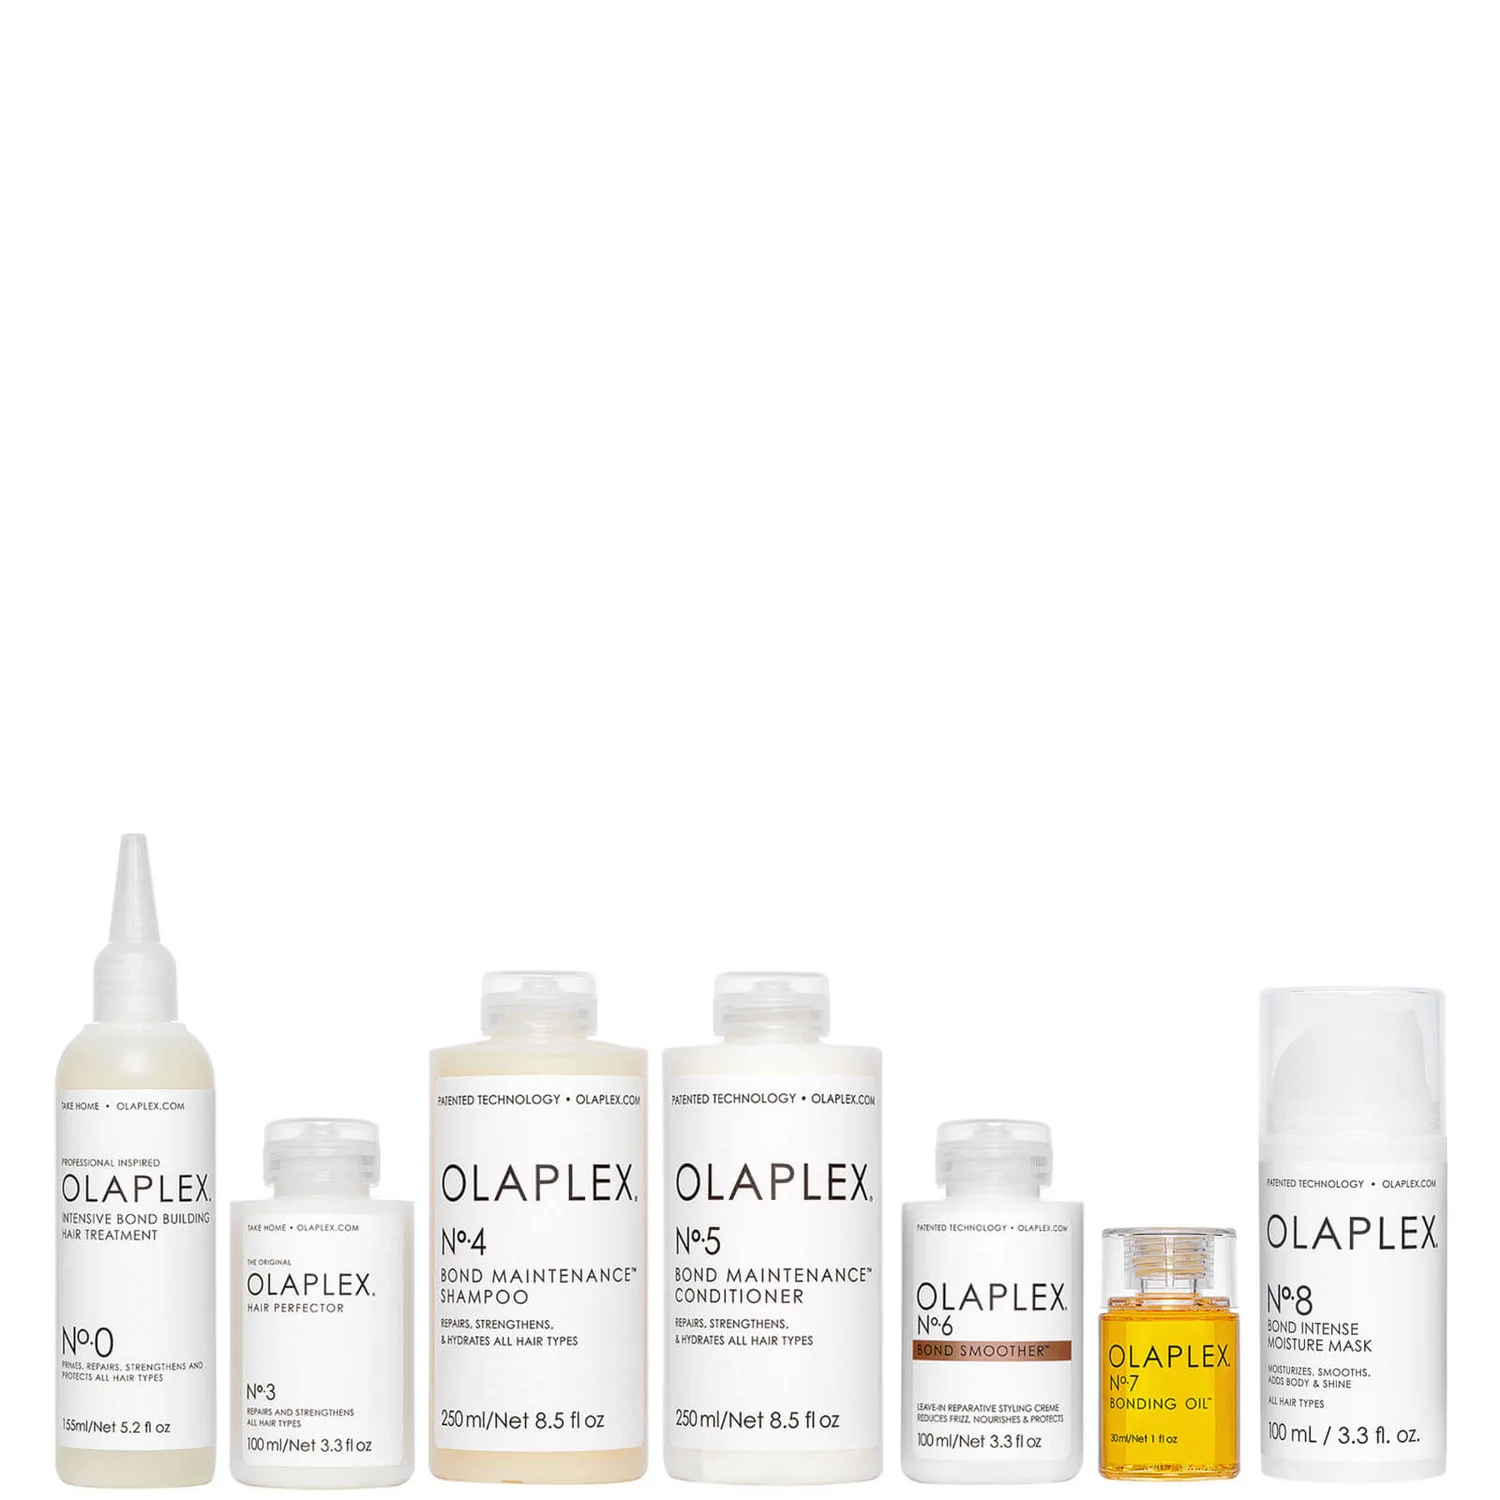 Olaplex Complete Collection £182.00 at Lookfantastic